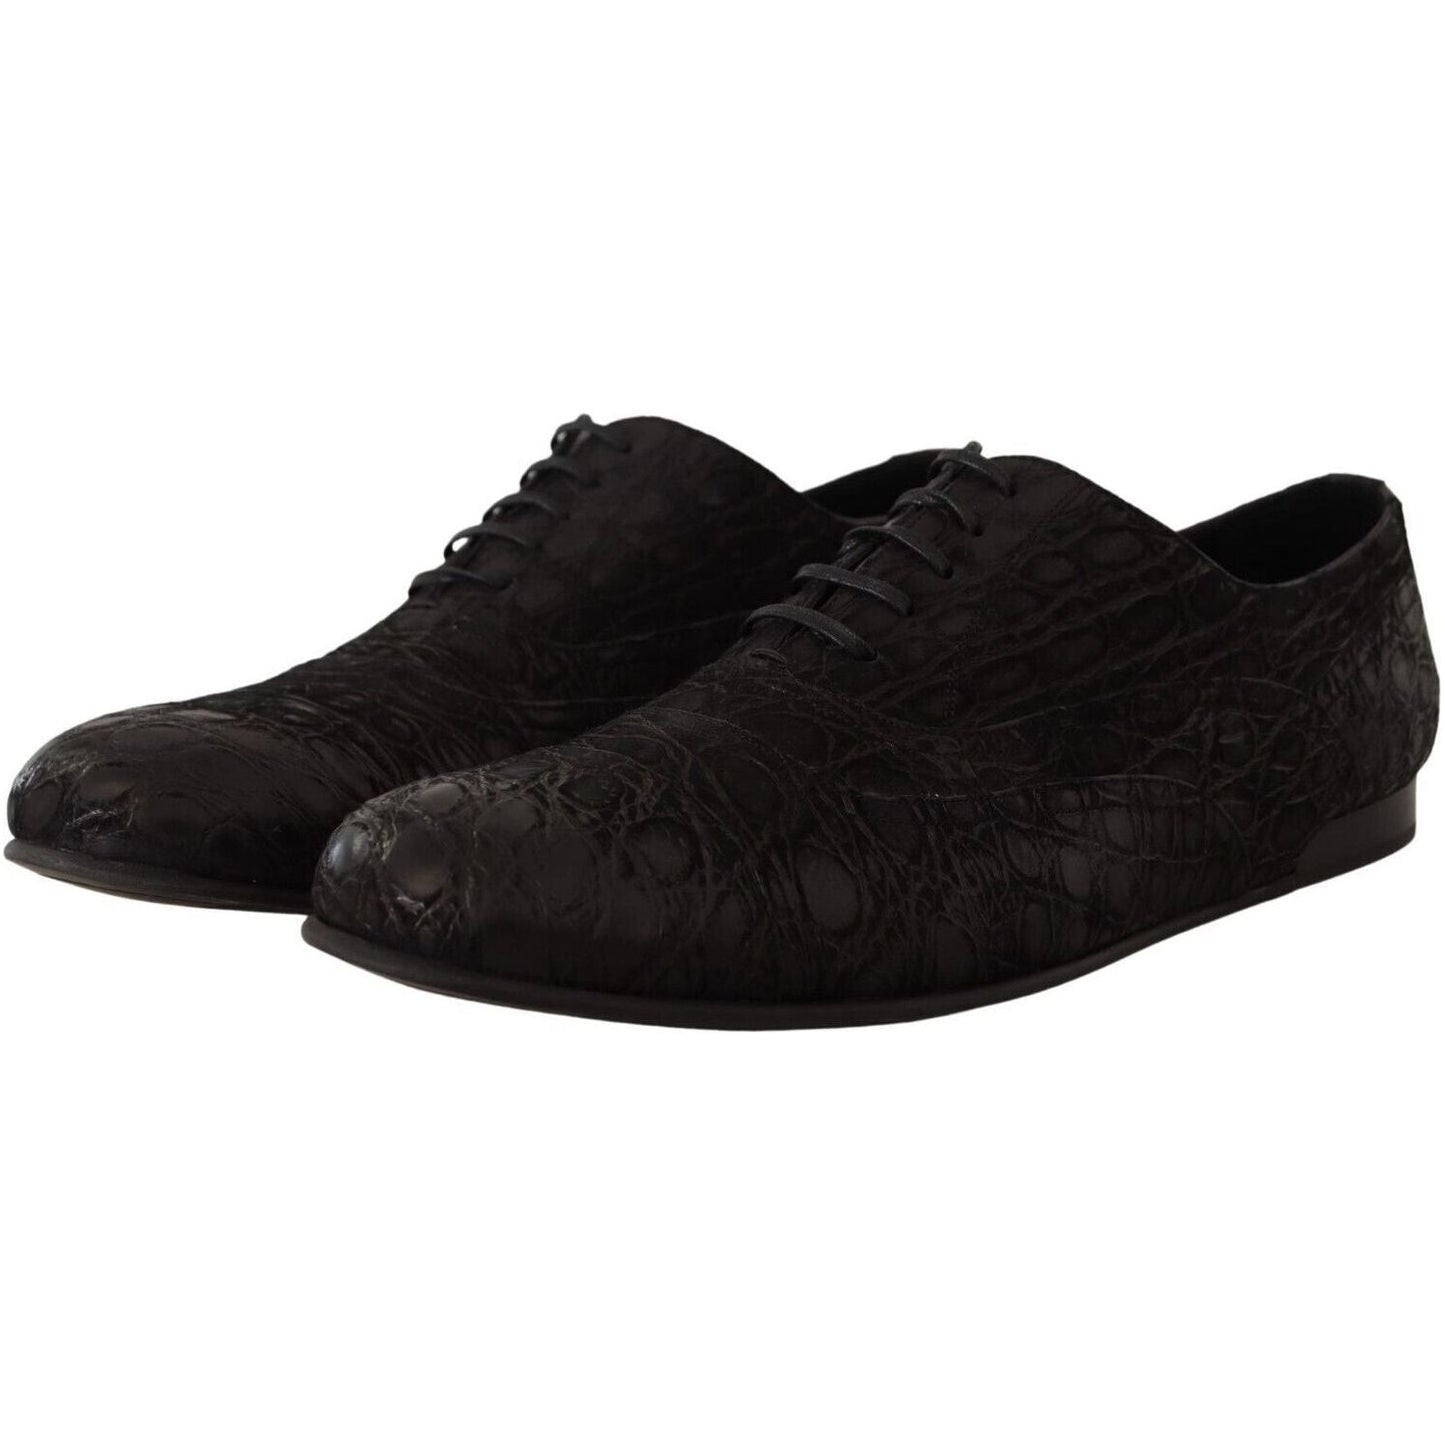 Dolce & Gabbana Elegant Exotic Leather Oxford Shoes black-caiman-leather-mens-oxford-shoes s-l1600-2-257-a264c716-2ca.jpg